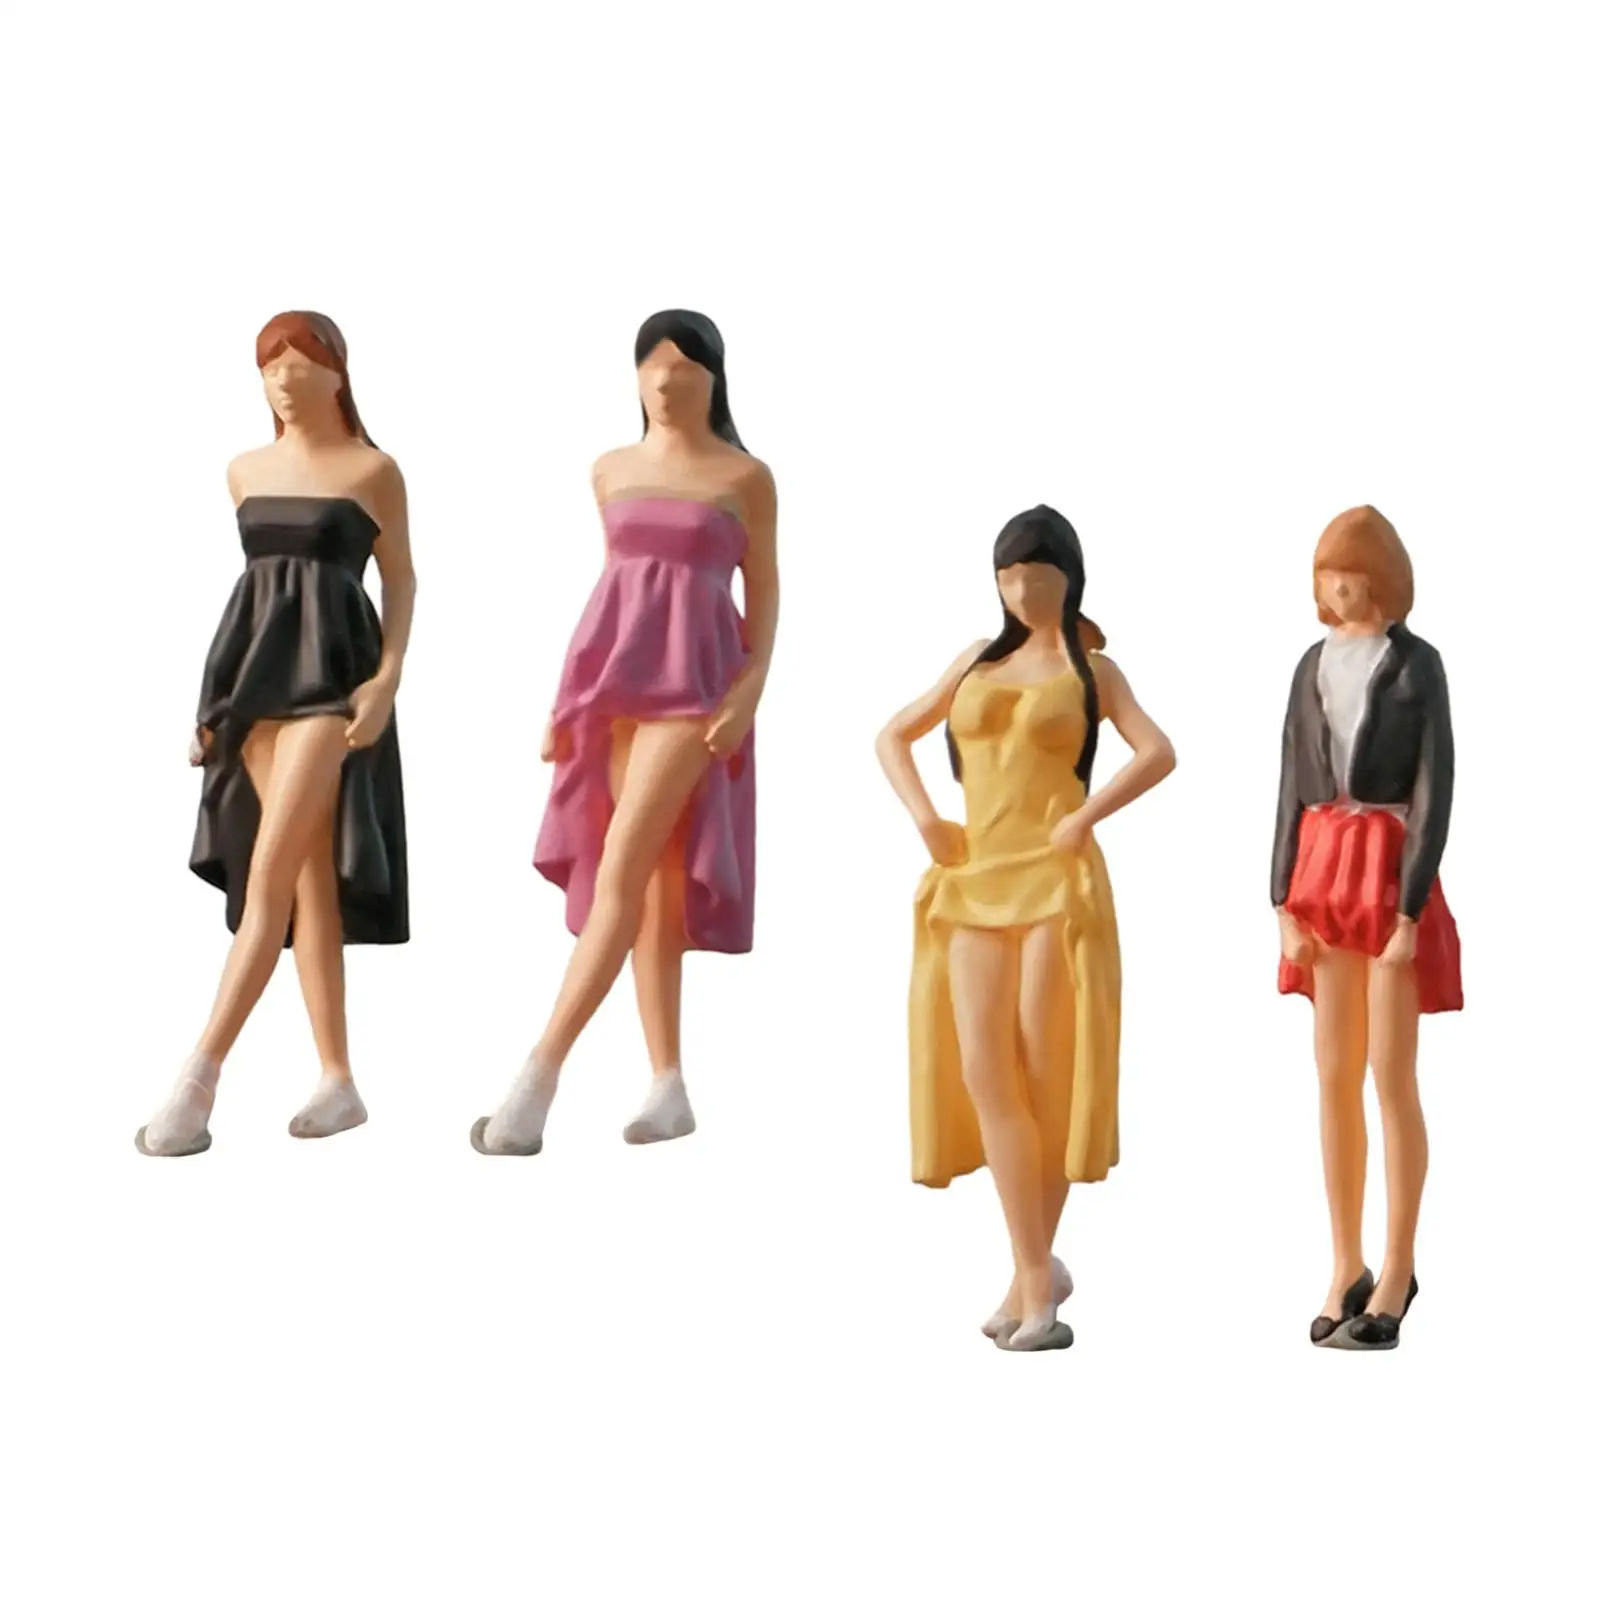 Diorama Figure Character Girl with Dress for Doll House Decoration Model Building Kits Model Trains Railway Sets Collections